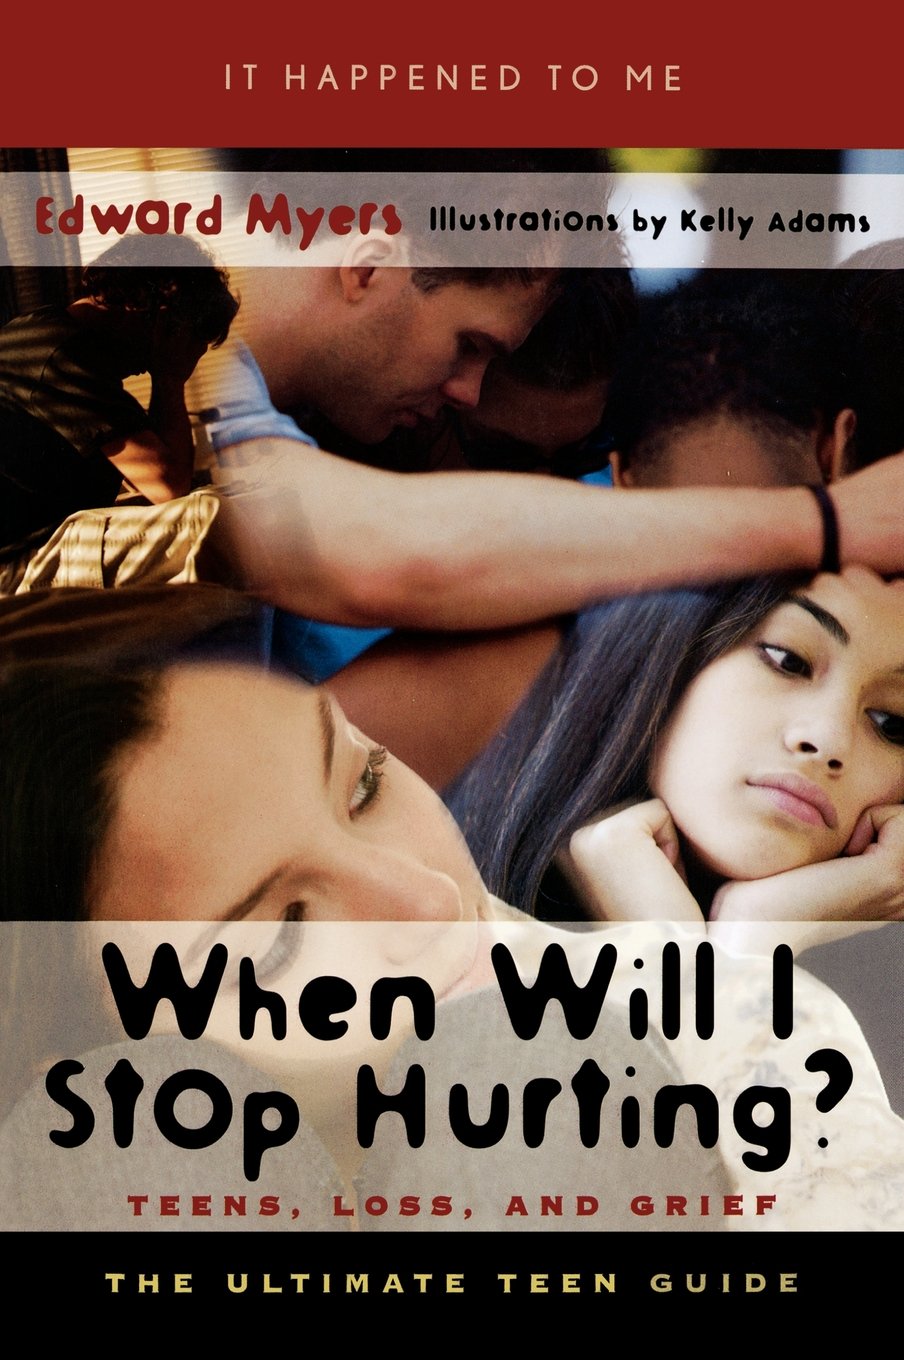 When Will I Stop Hurting? Teens, Loss, and Grief